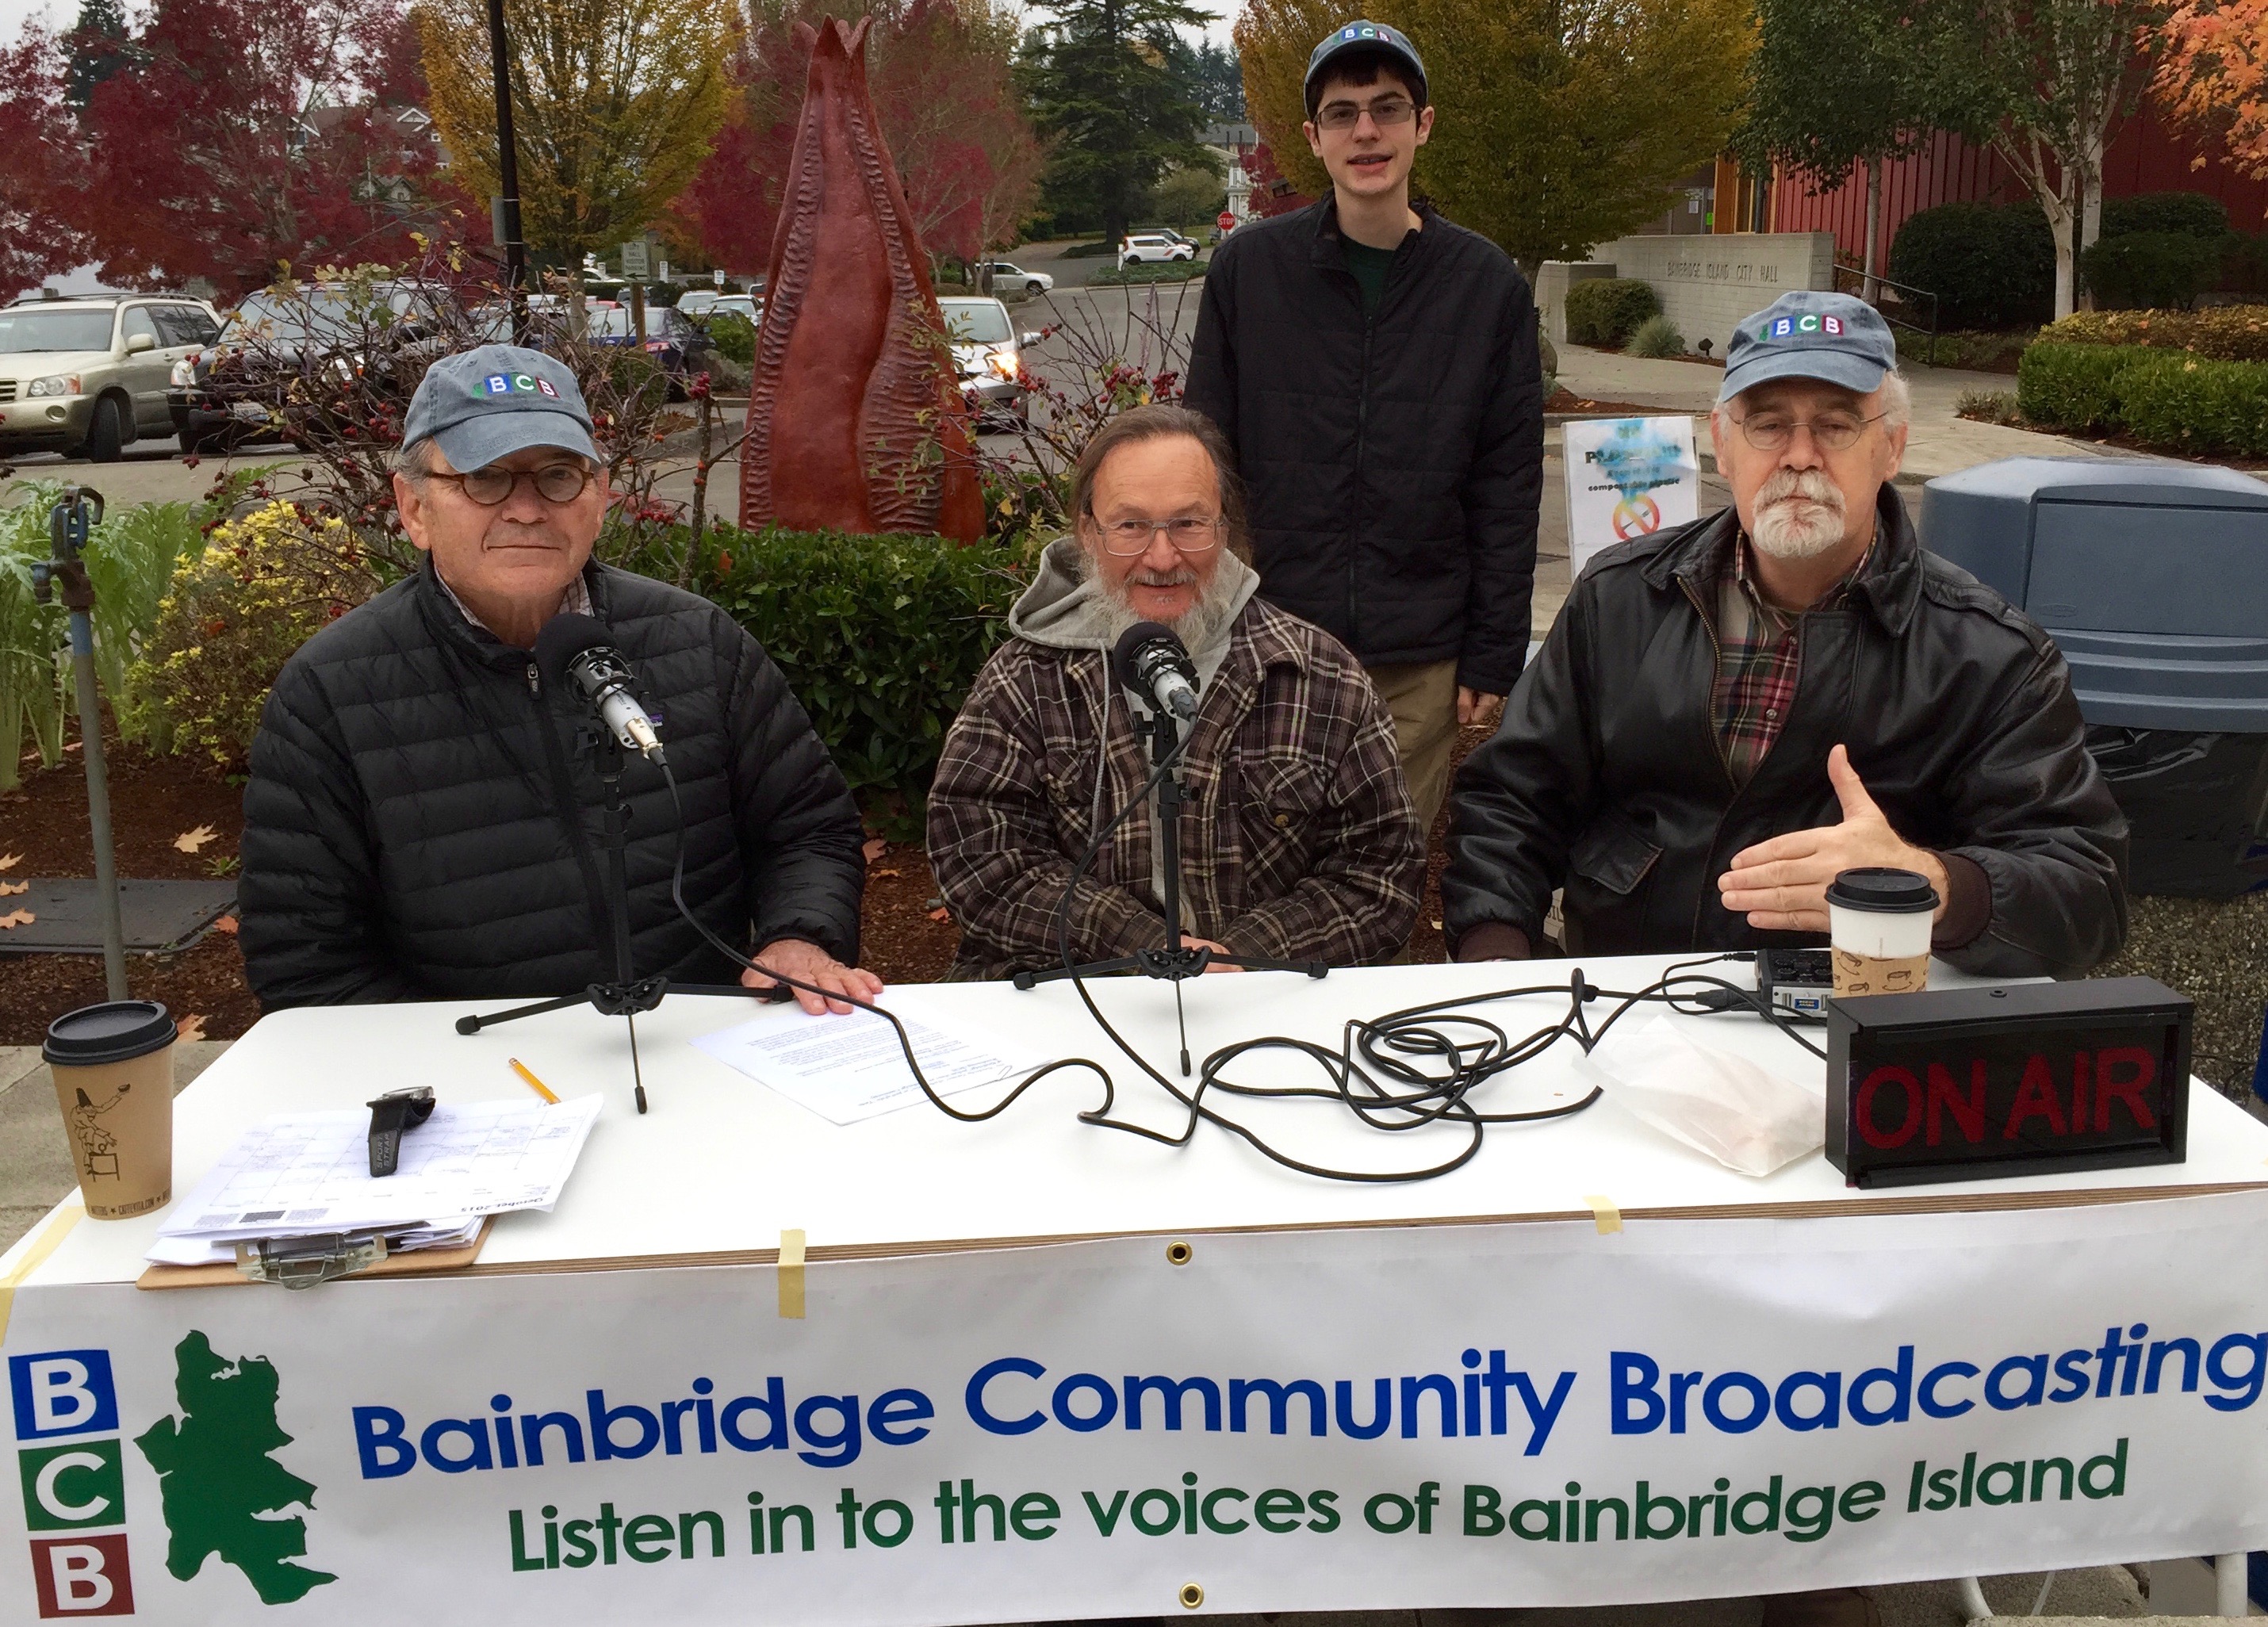 <i>Podcast: What’s Up Bainbridge: </i><br>At the Farmers Market Oct 24th with fisherman Paul Svornich